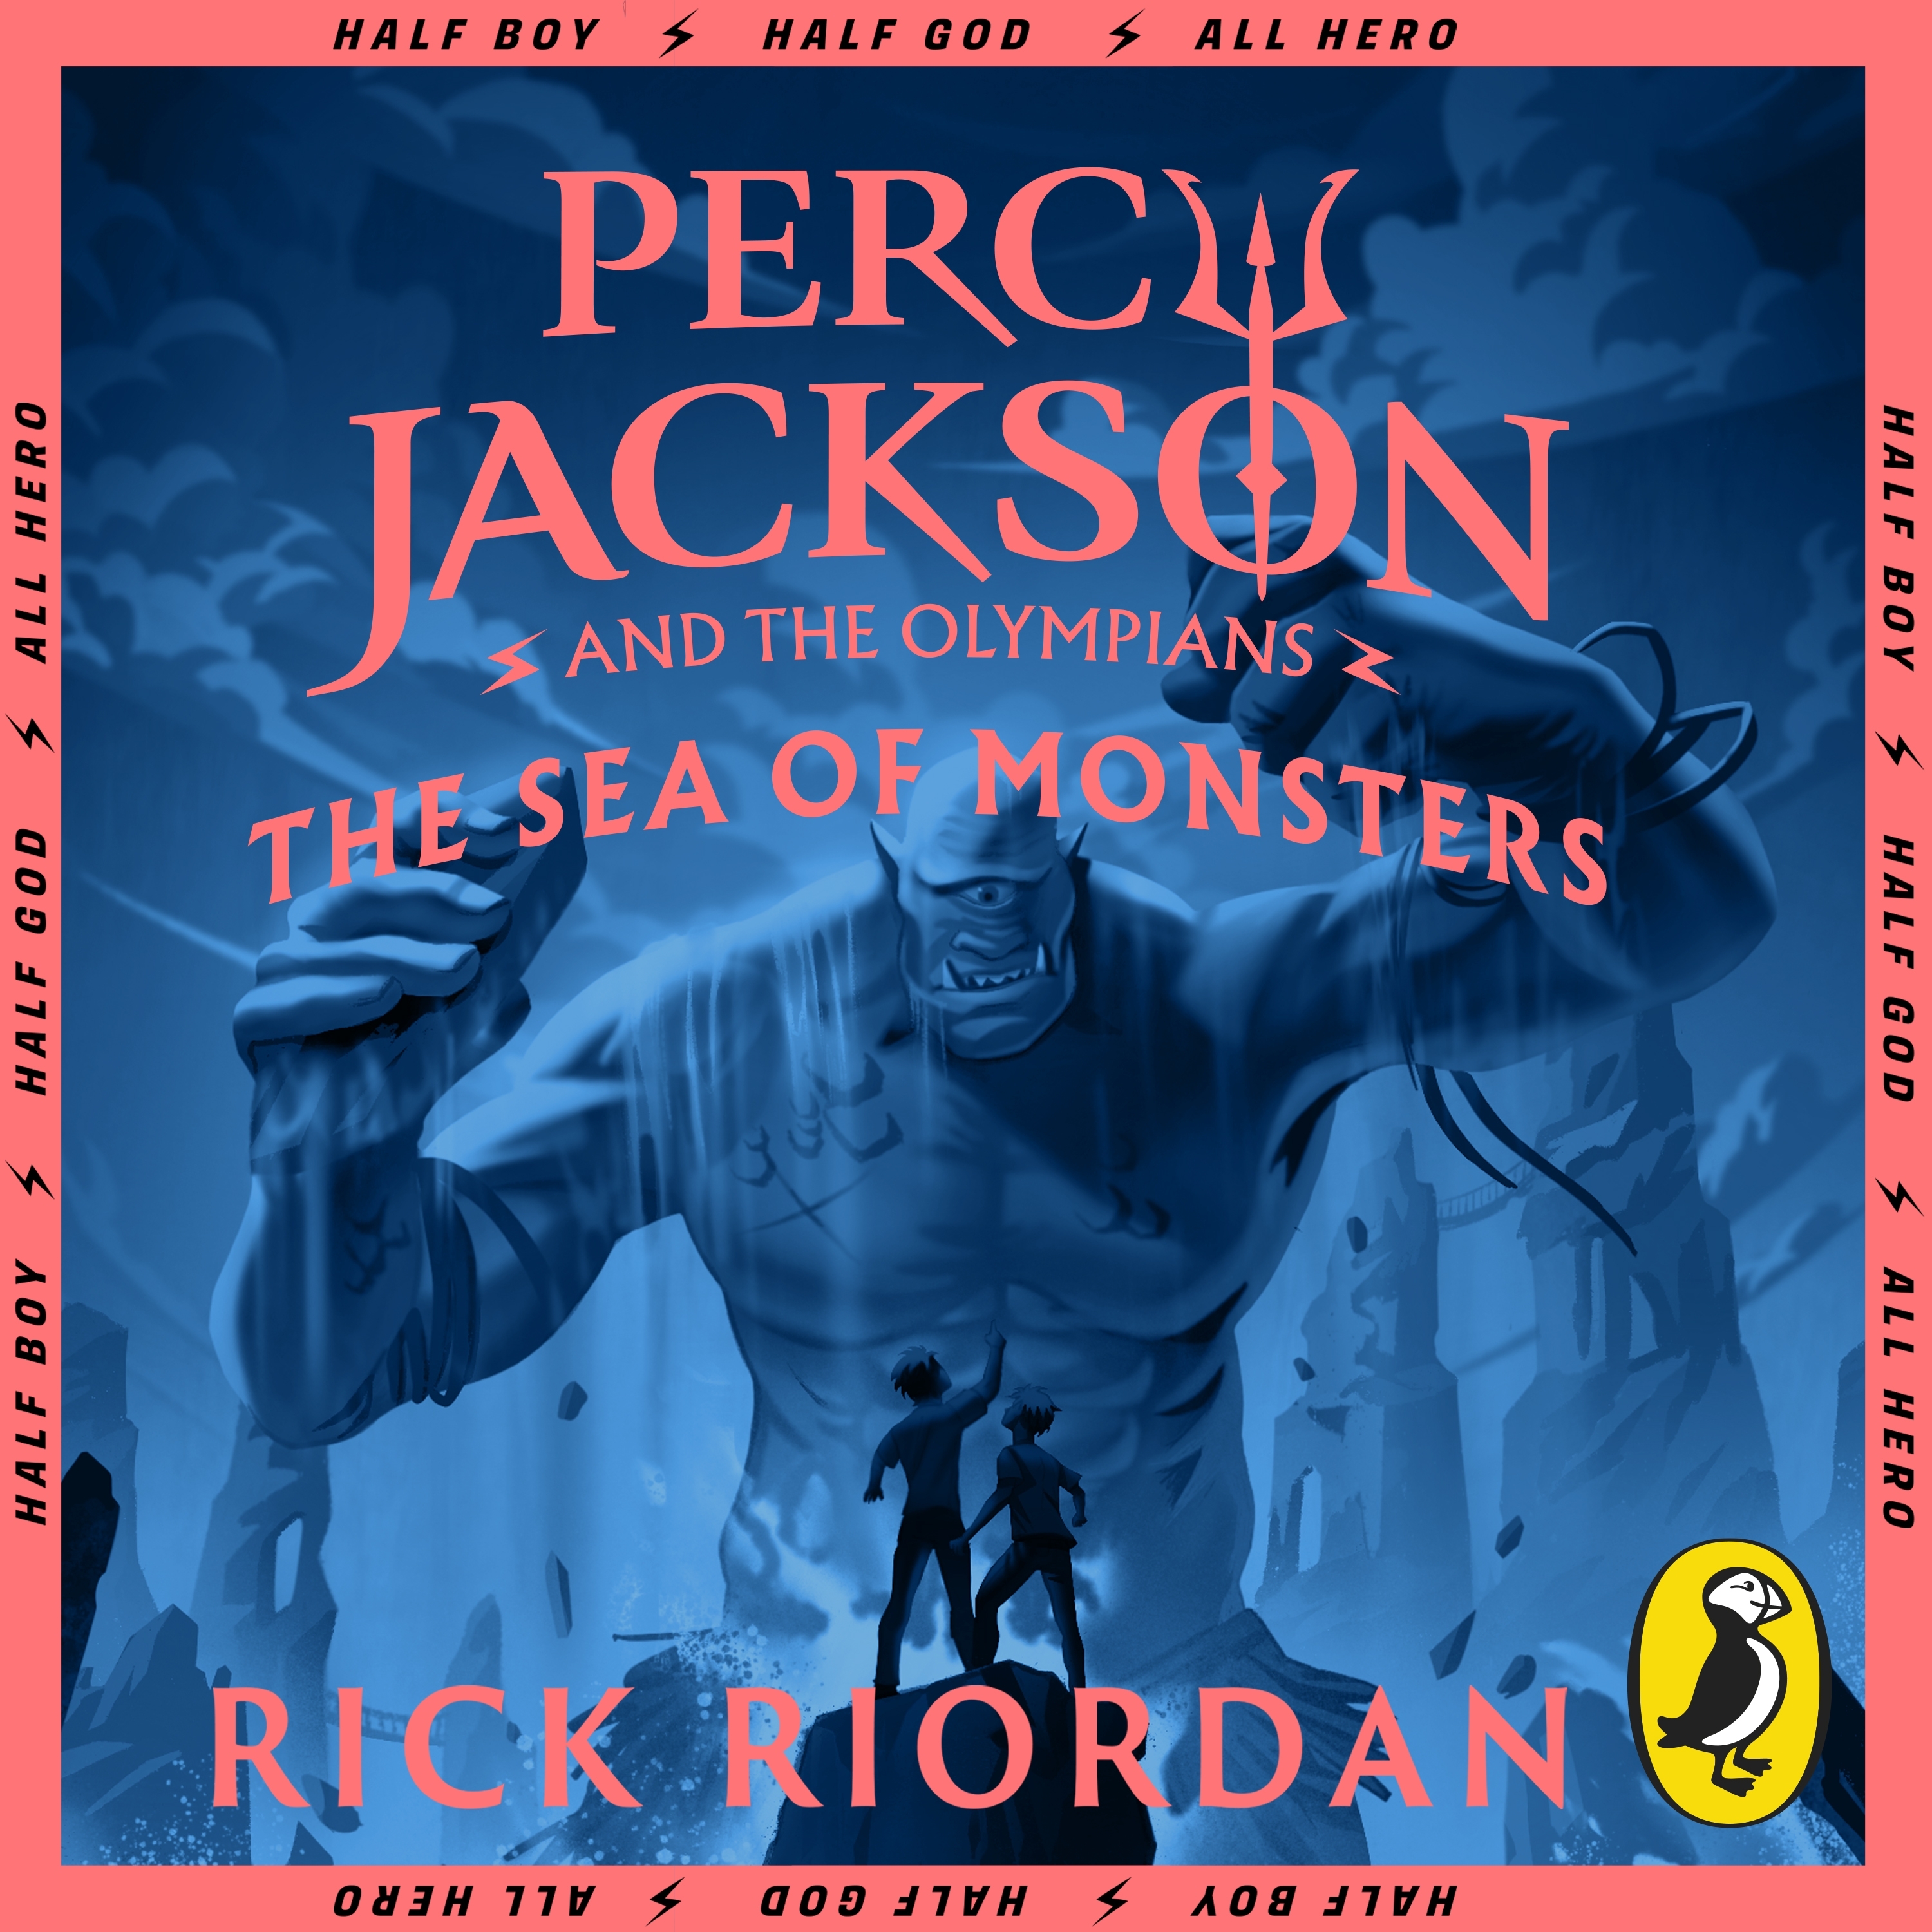 book review on percy jackson and the sea of monsters